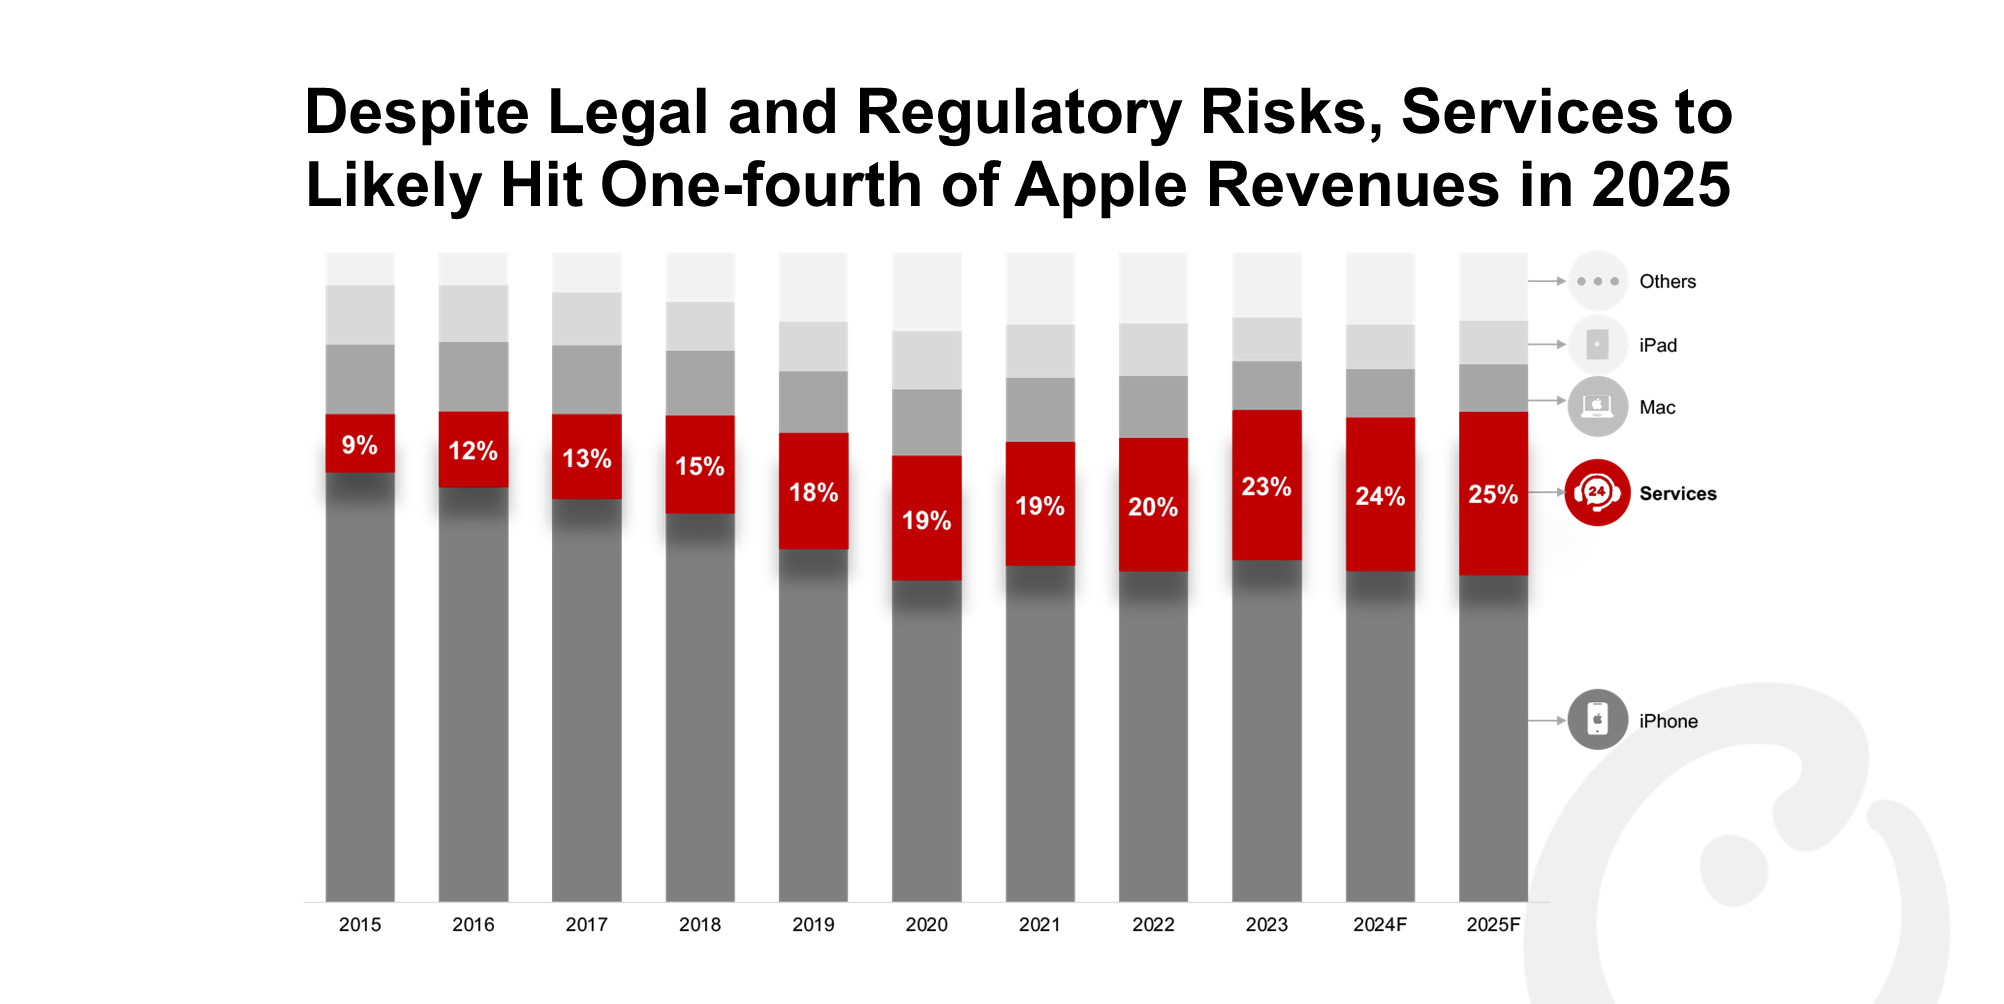 Despite Legal and Regulatory Risks, Services to Likely Hit One-fourth of Apple Revenues in 2025